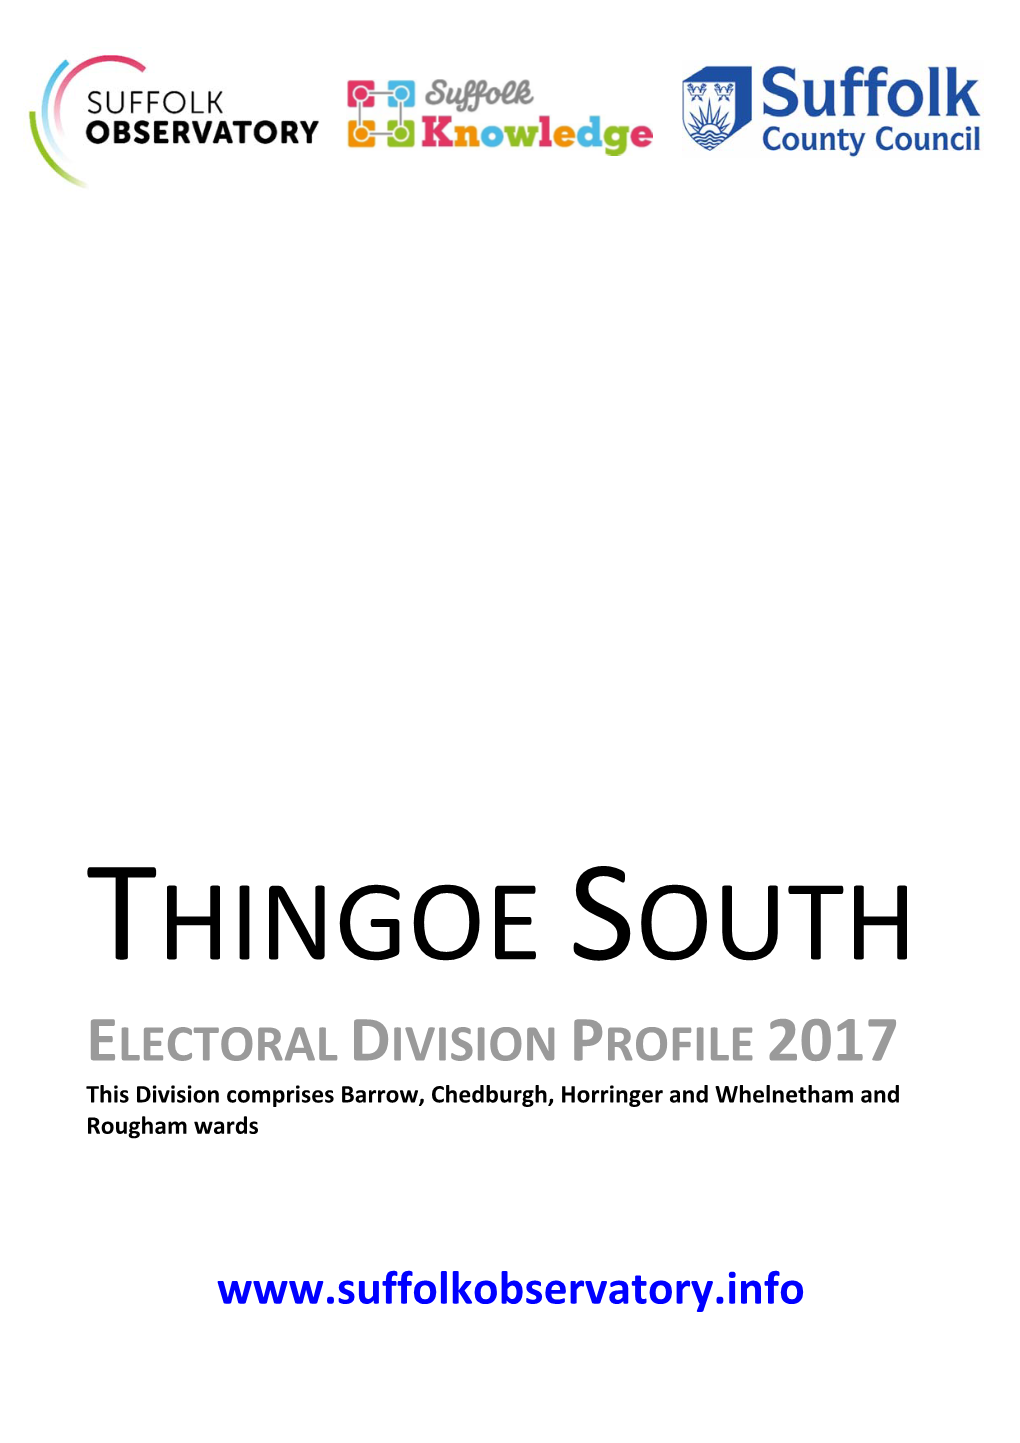 THINGOE SOUTH ELECTORAL DIVISION PROFILE 2017 This Division Comprises Barrow, Chedburgh, Horringer and Whelnetham and Rougham Wards